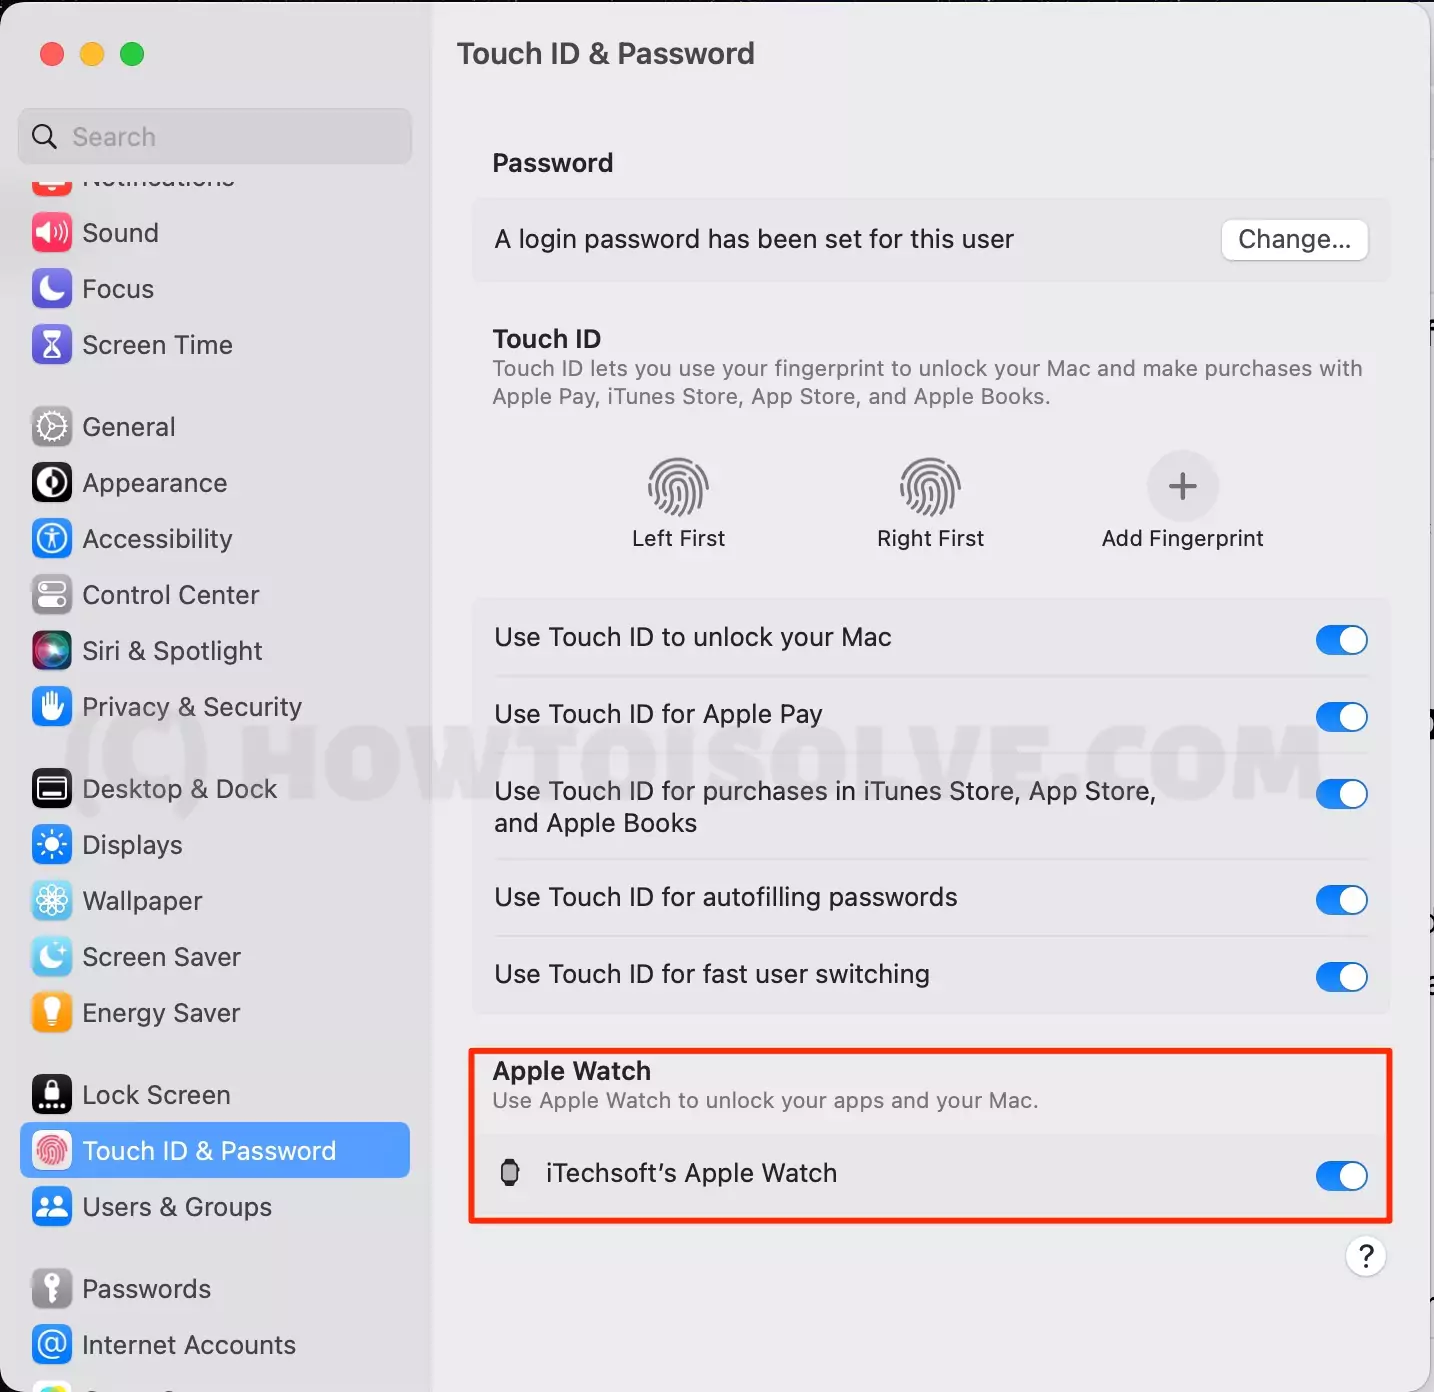 use-apple-watch-to-unlock-your-apps-and-your-mac